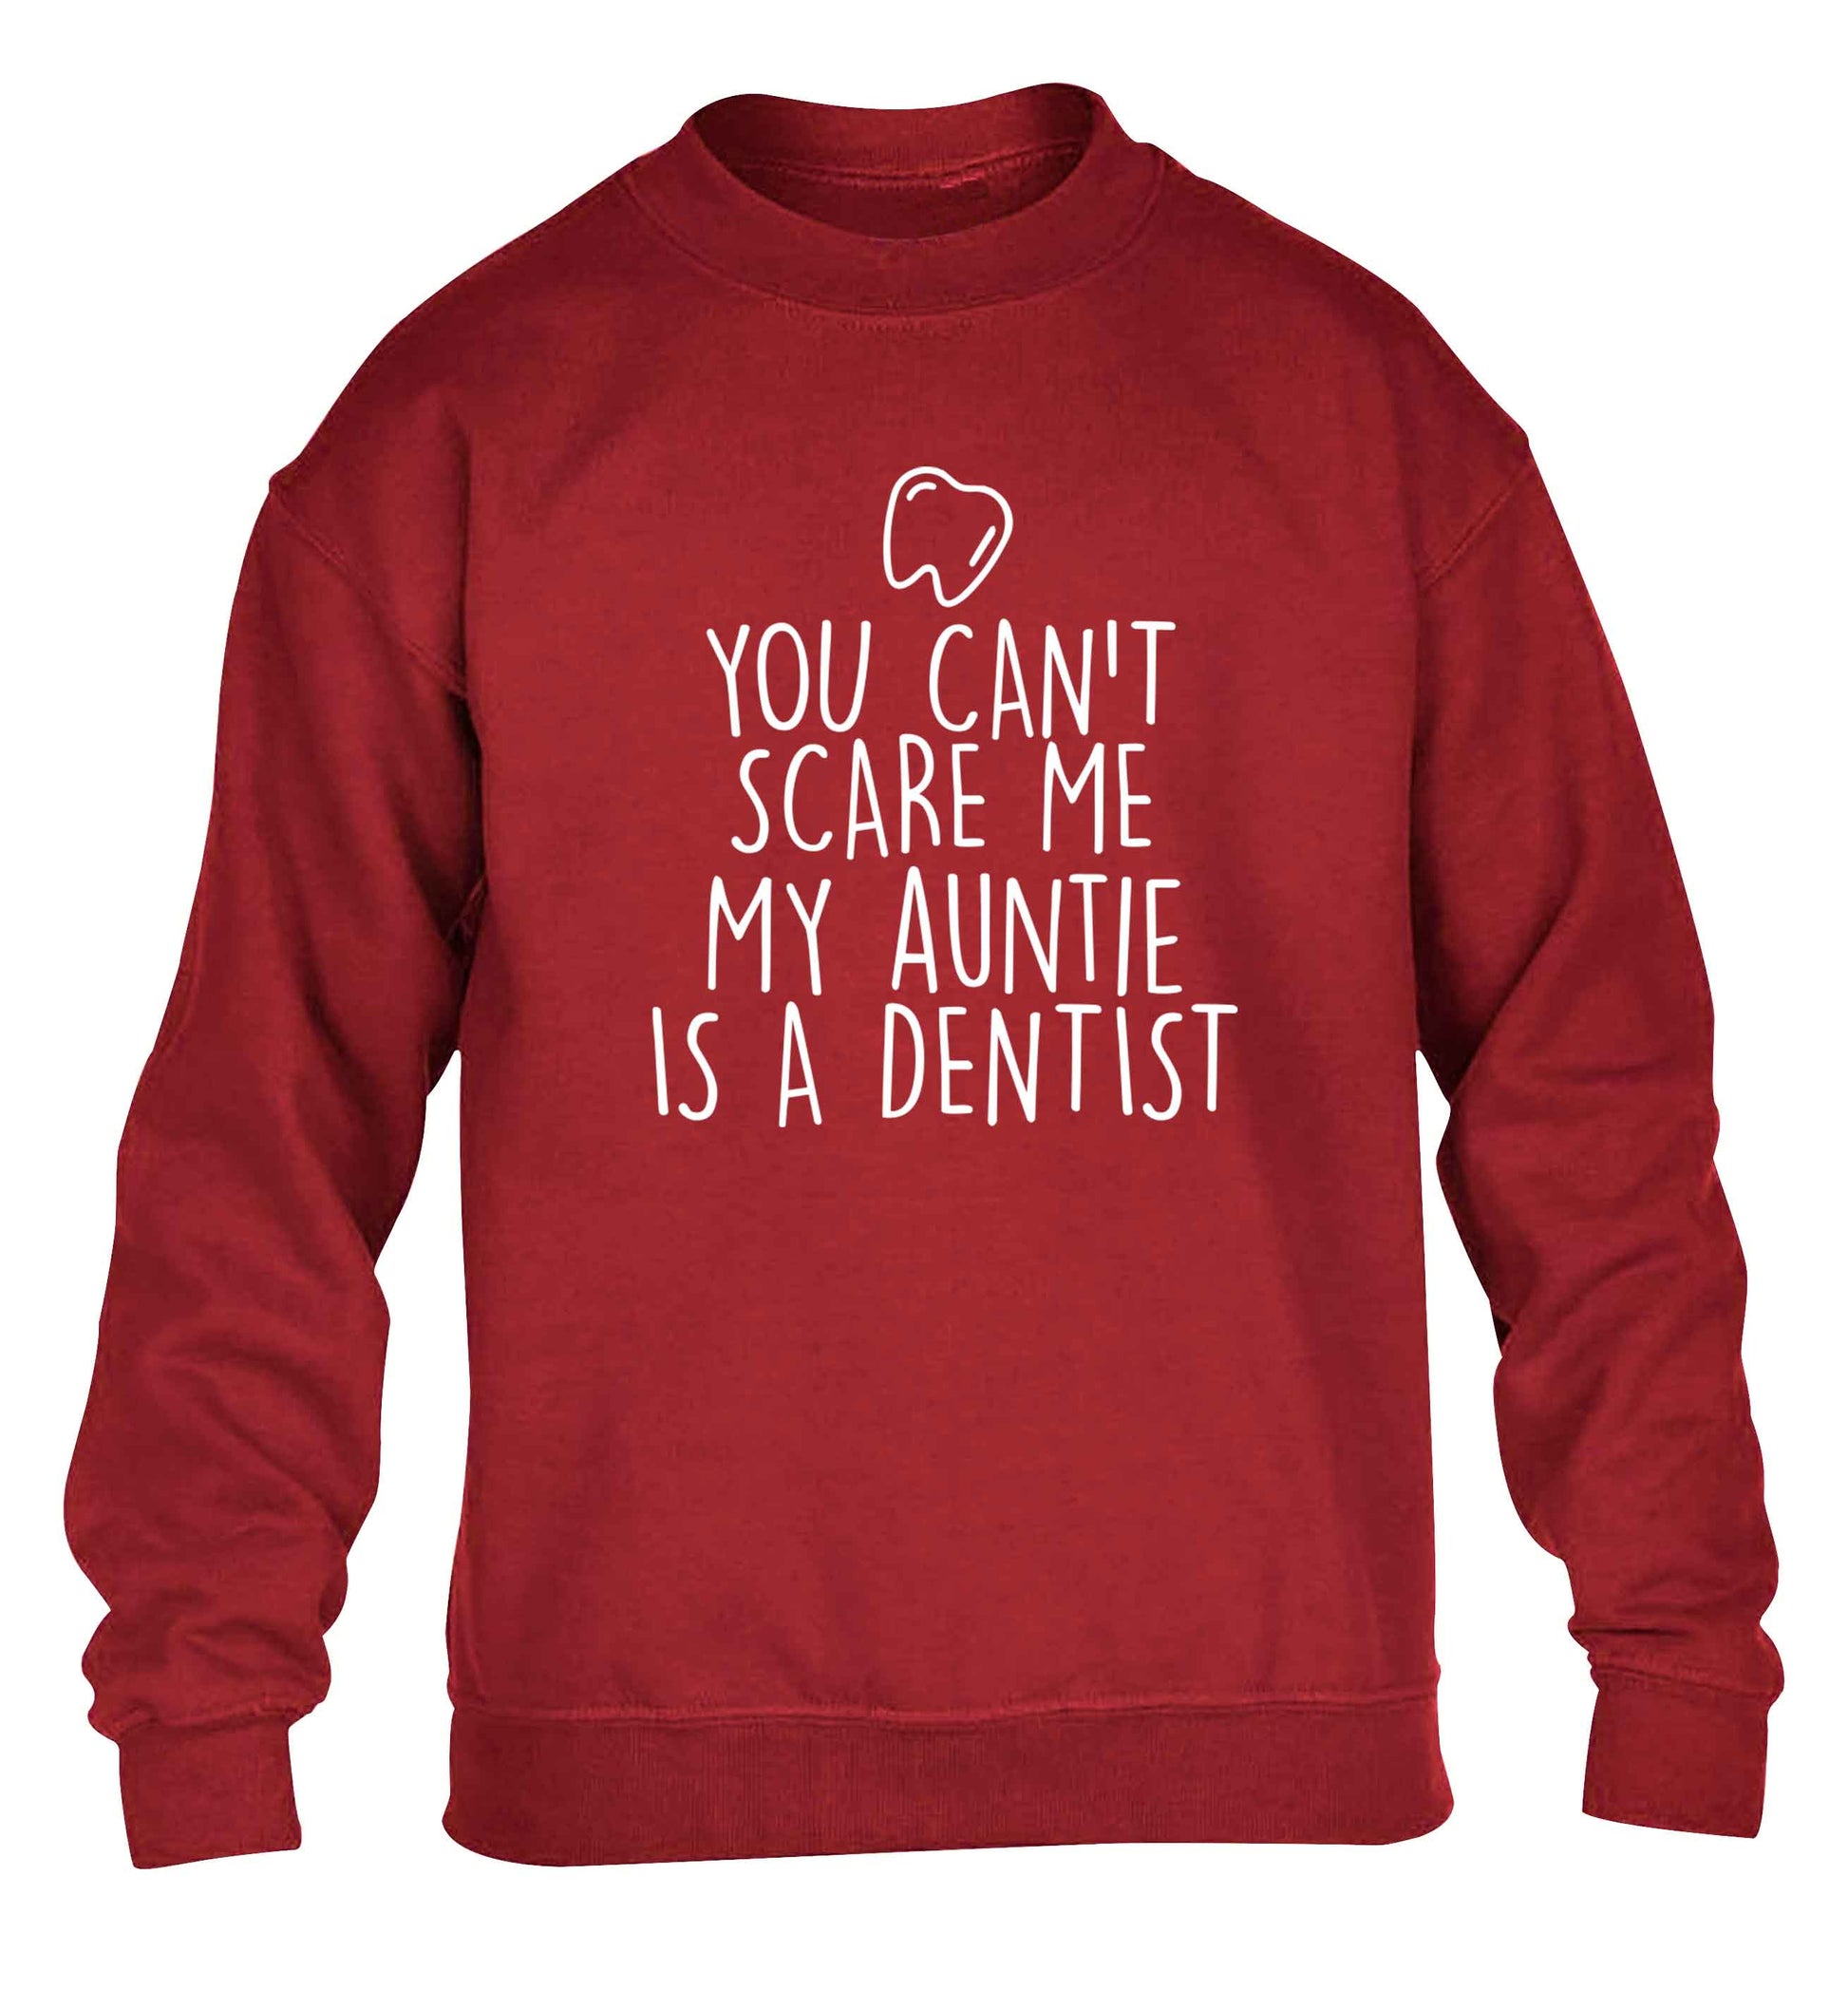 You can't scare me my auntie is a dentist children's grey sweater 12-13 Years